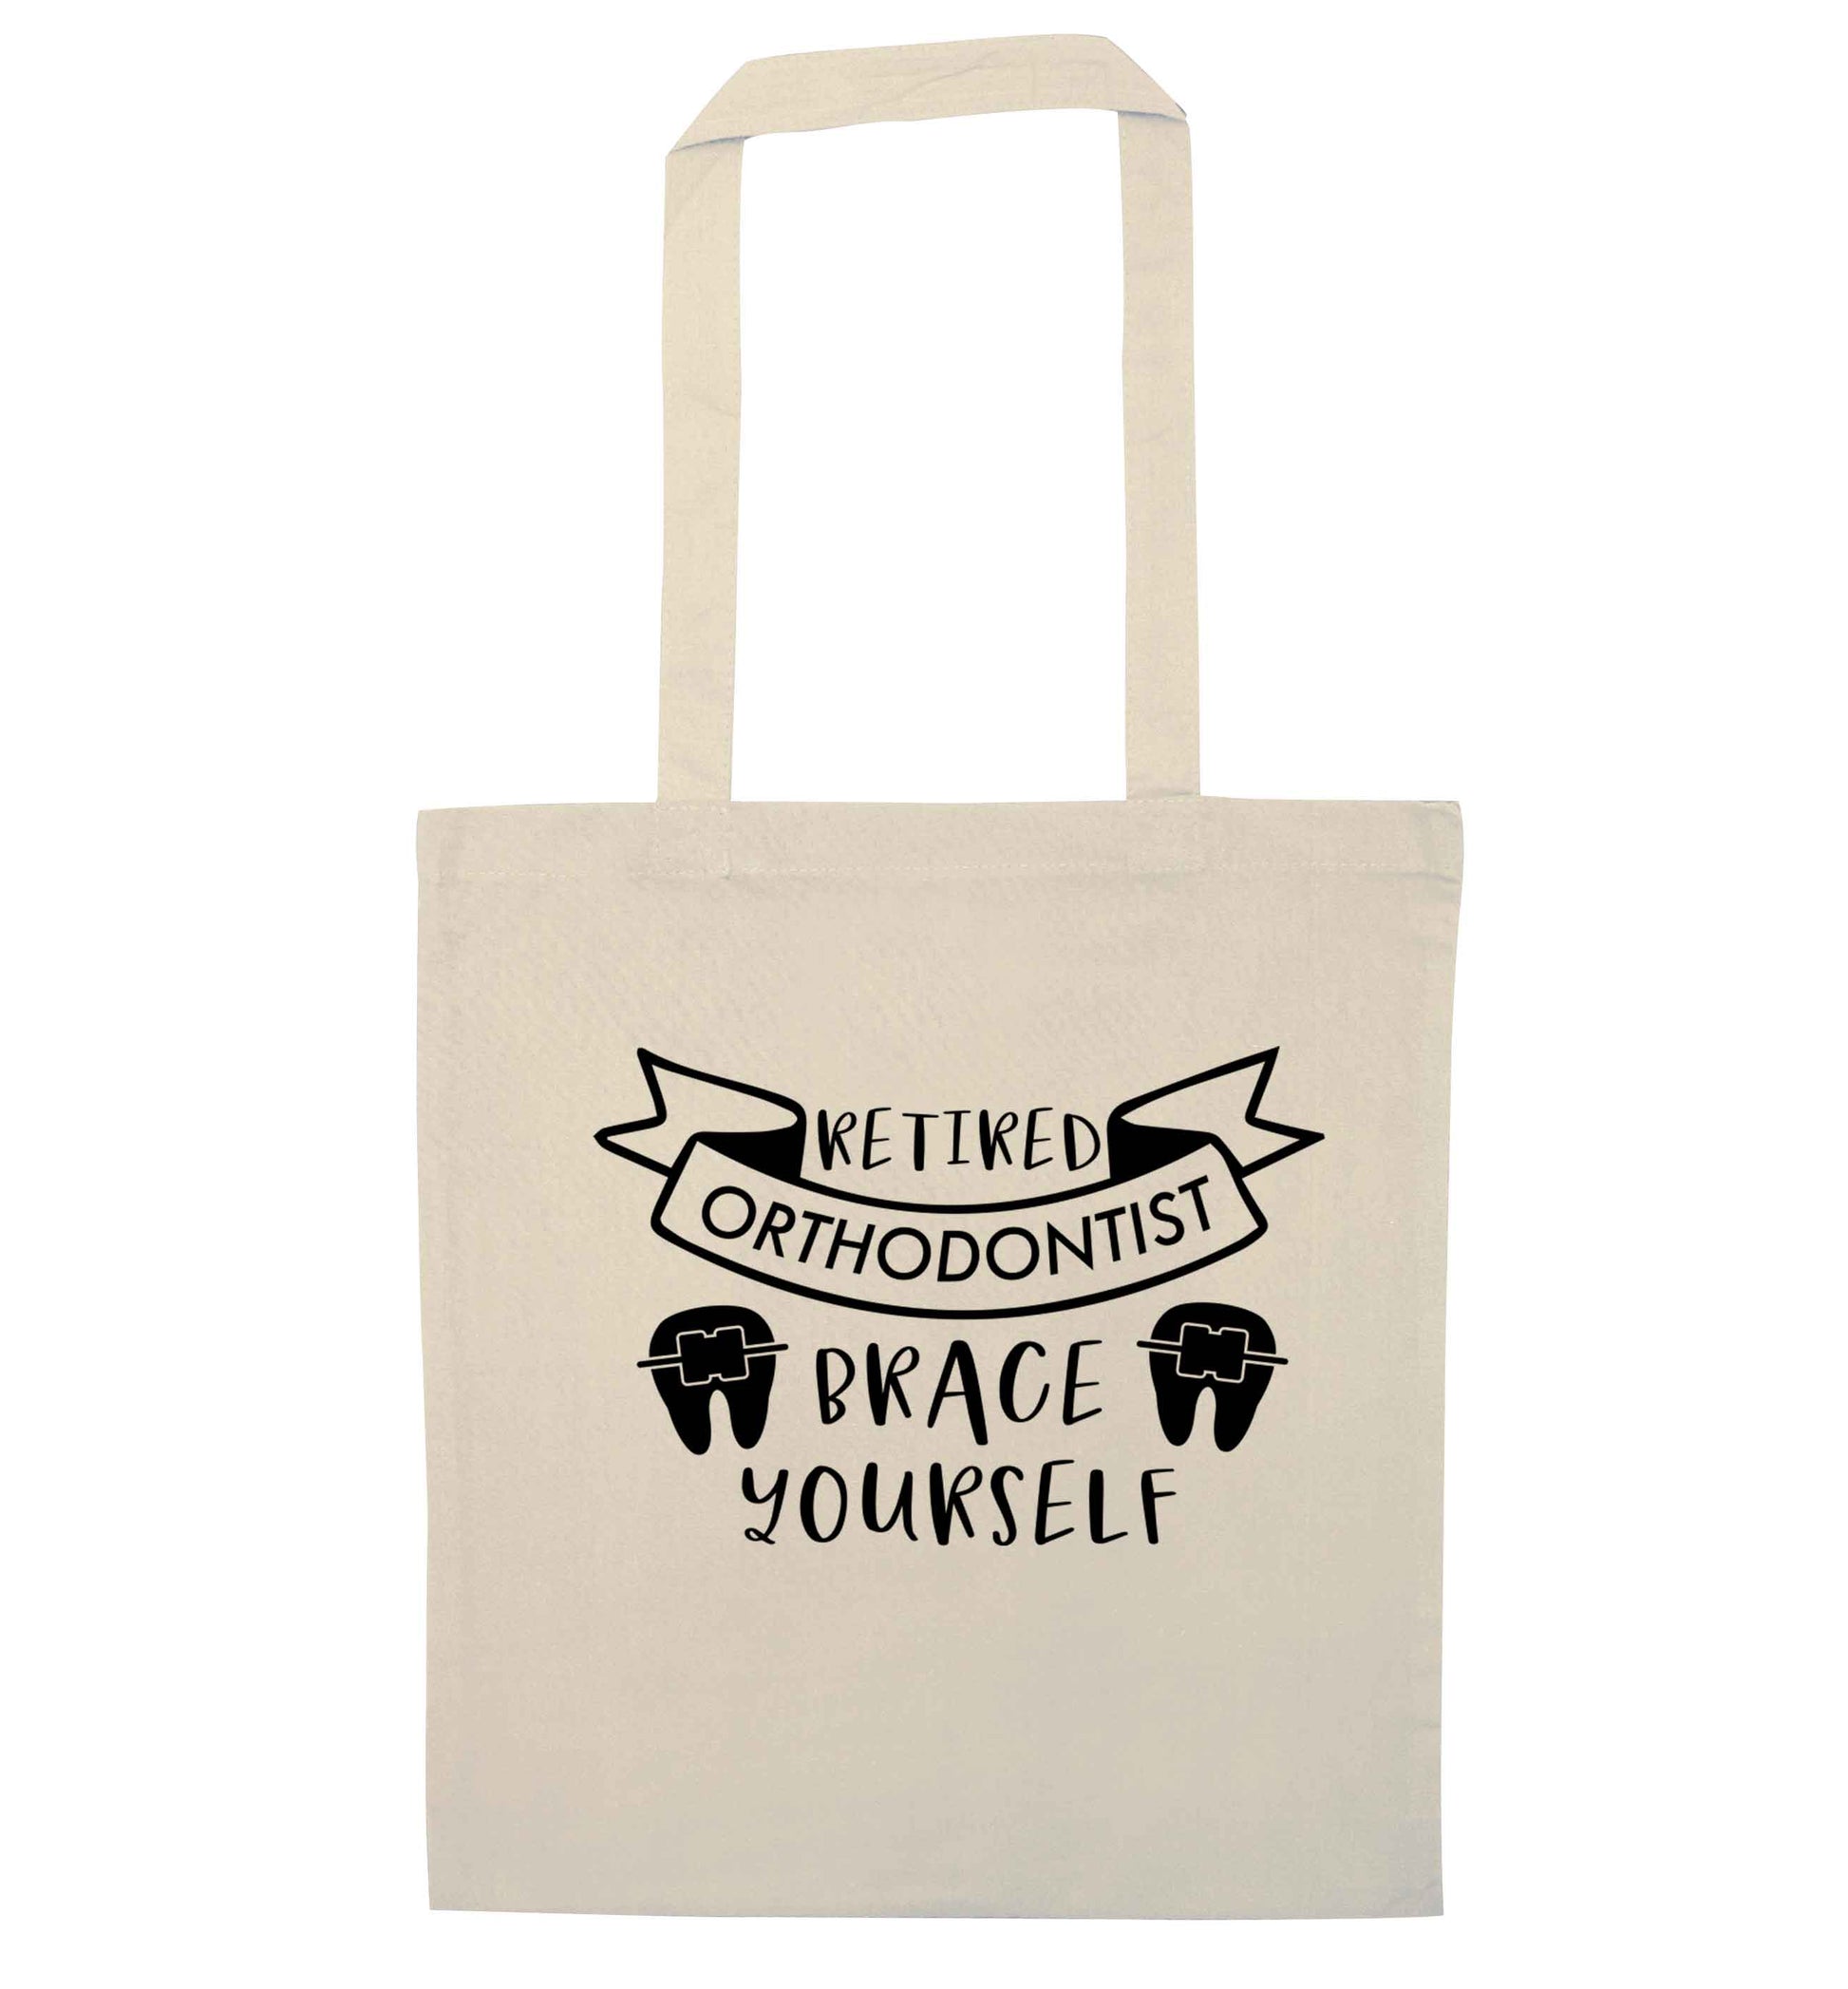 Retired orthodontist brace yourself natural tote bag